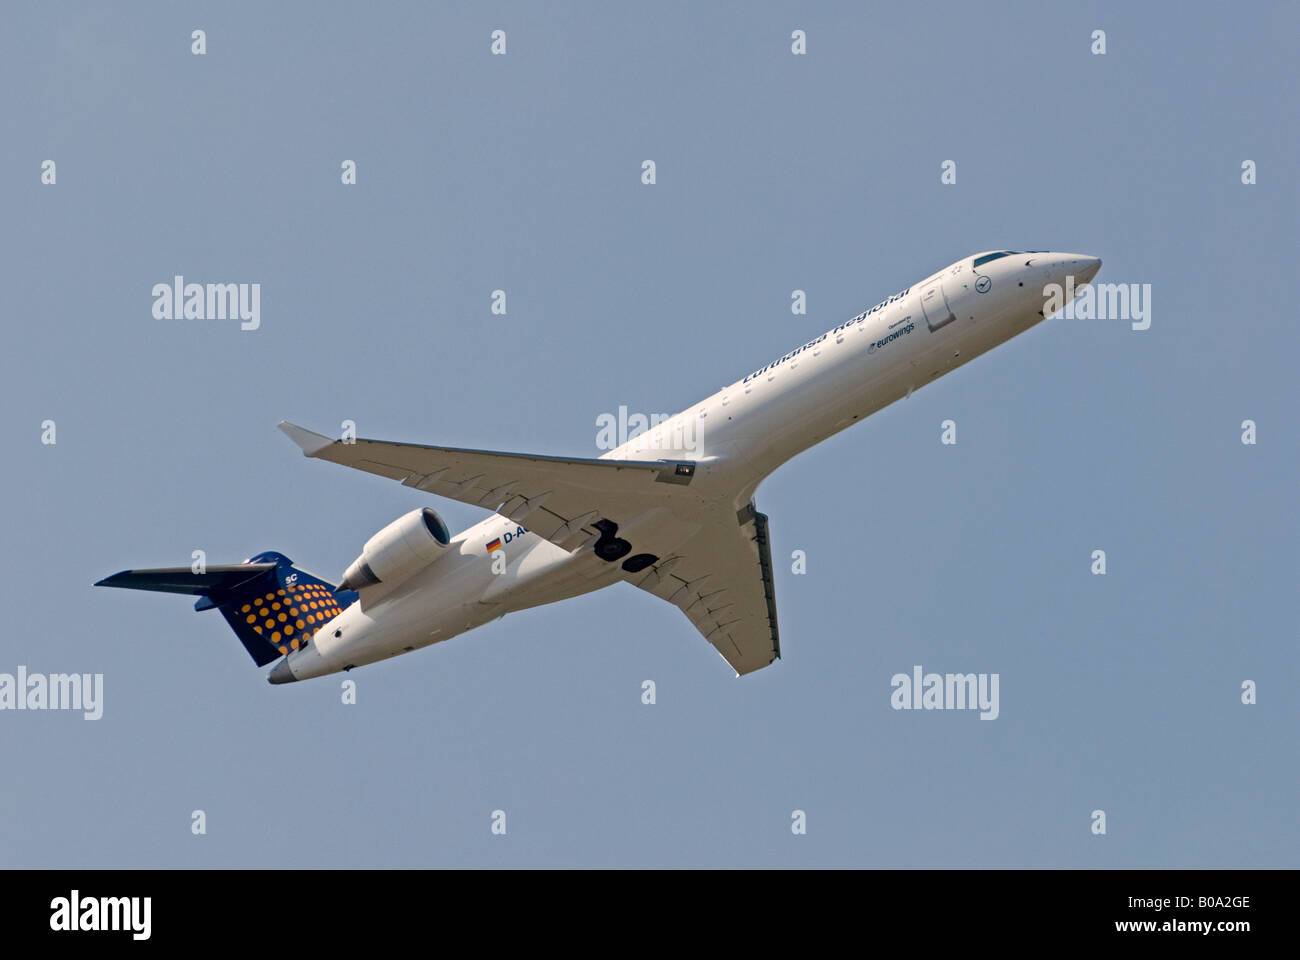 Commercial airliner taking off Stock Photo